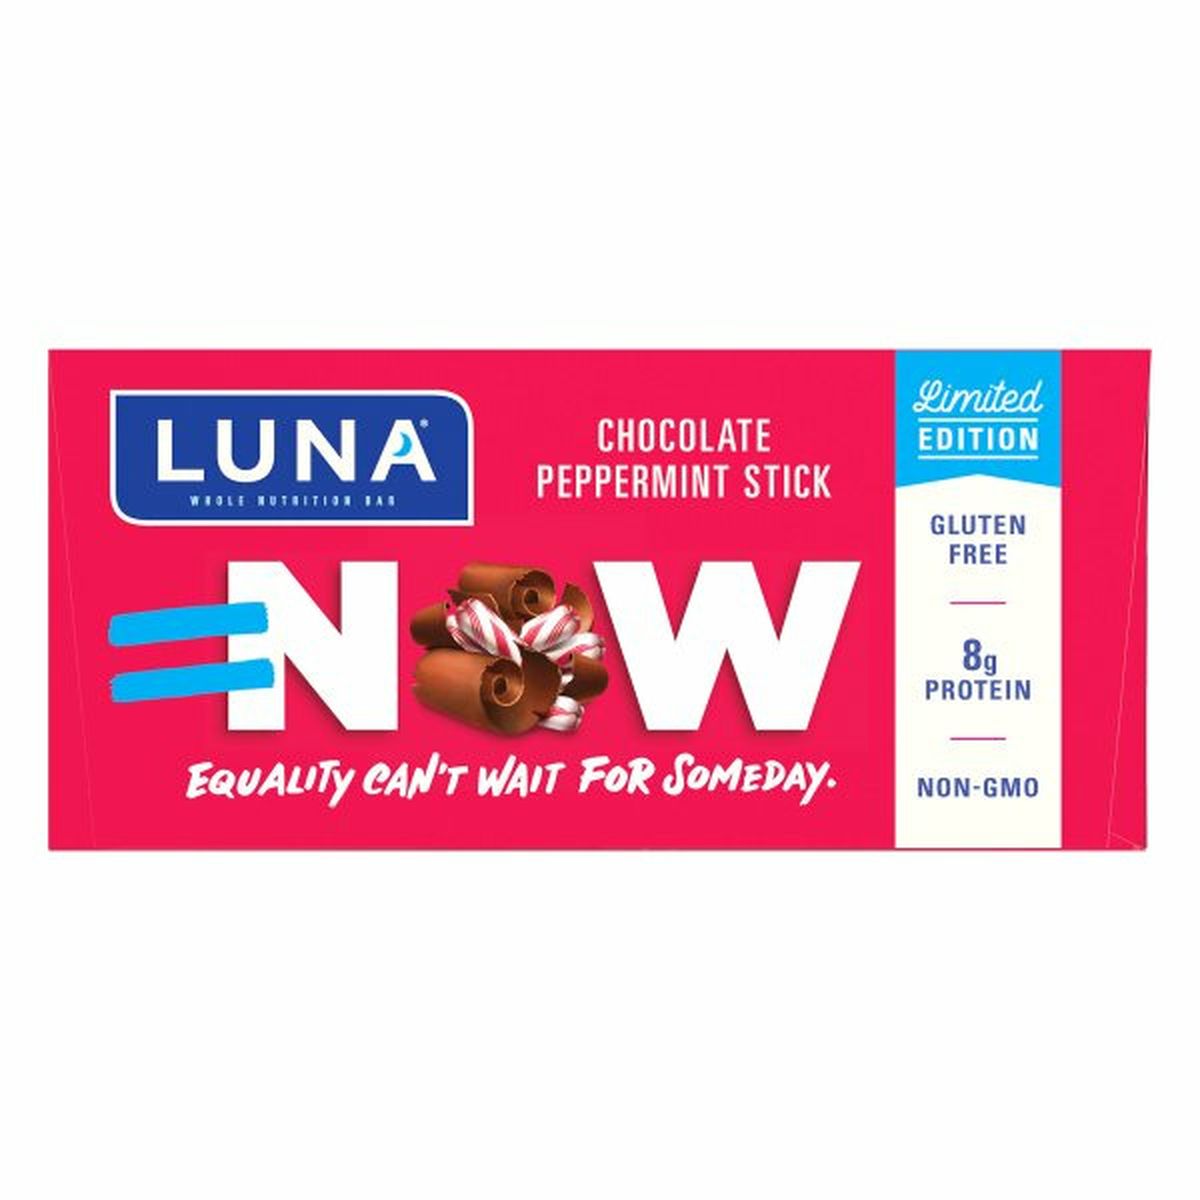 Calories in Luna Whole Nutrition Bar, Chocolate Peppermint Stick